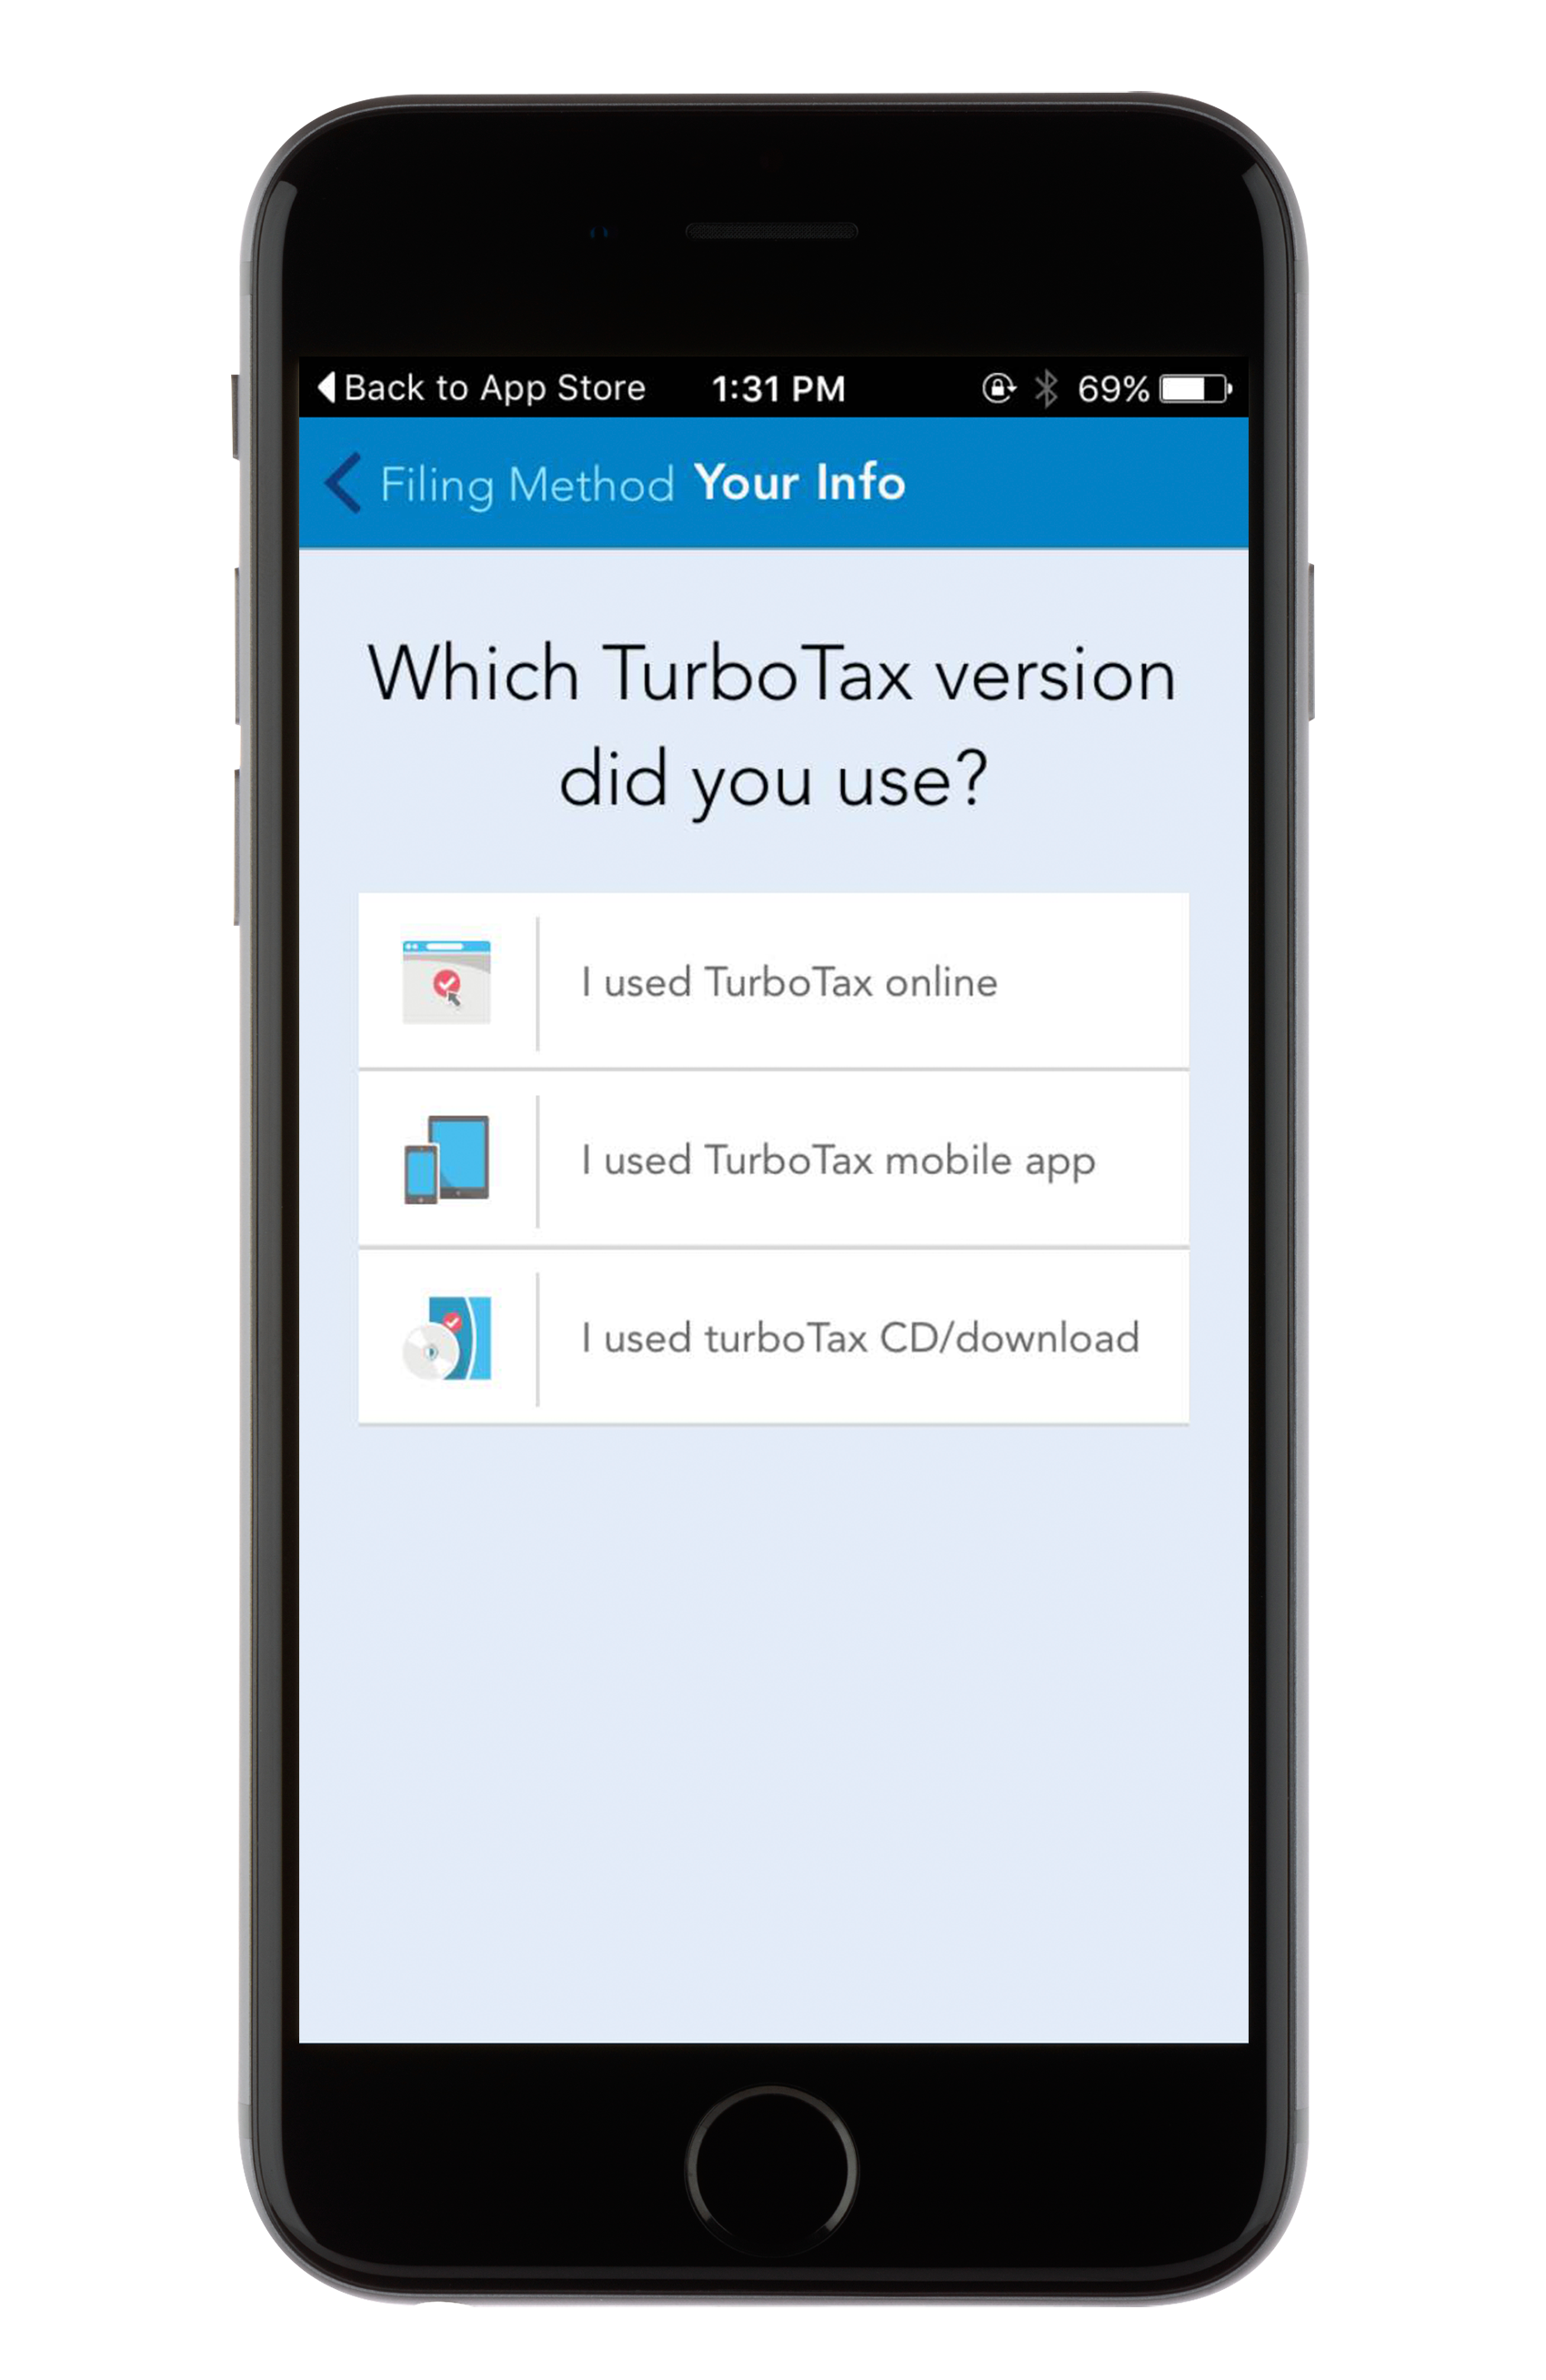 How do you find contact information for Turbo Tax?